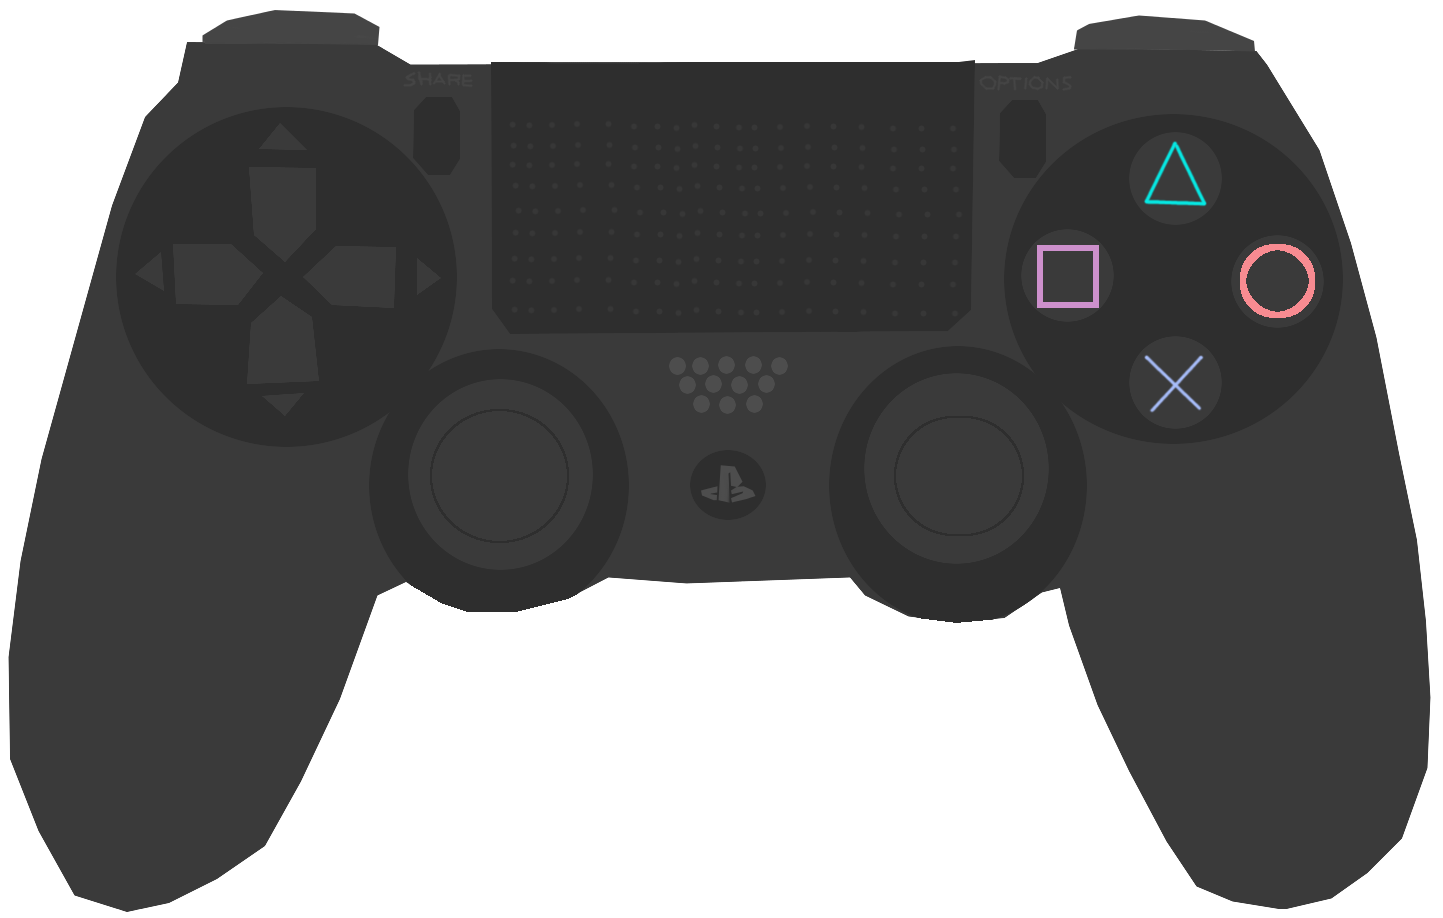 PS4 Controller by ControversialGopher on DeviantArt.